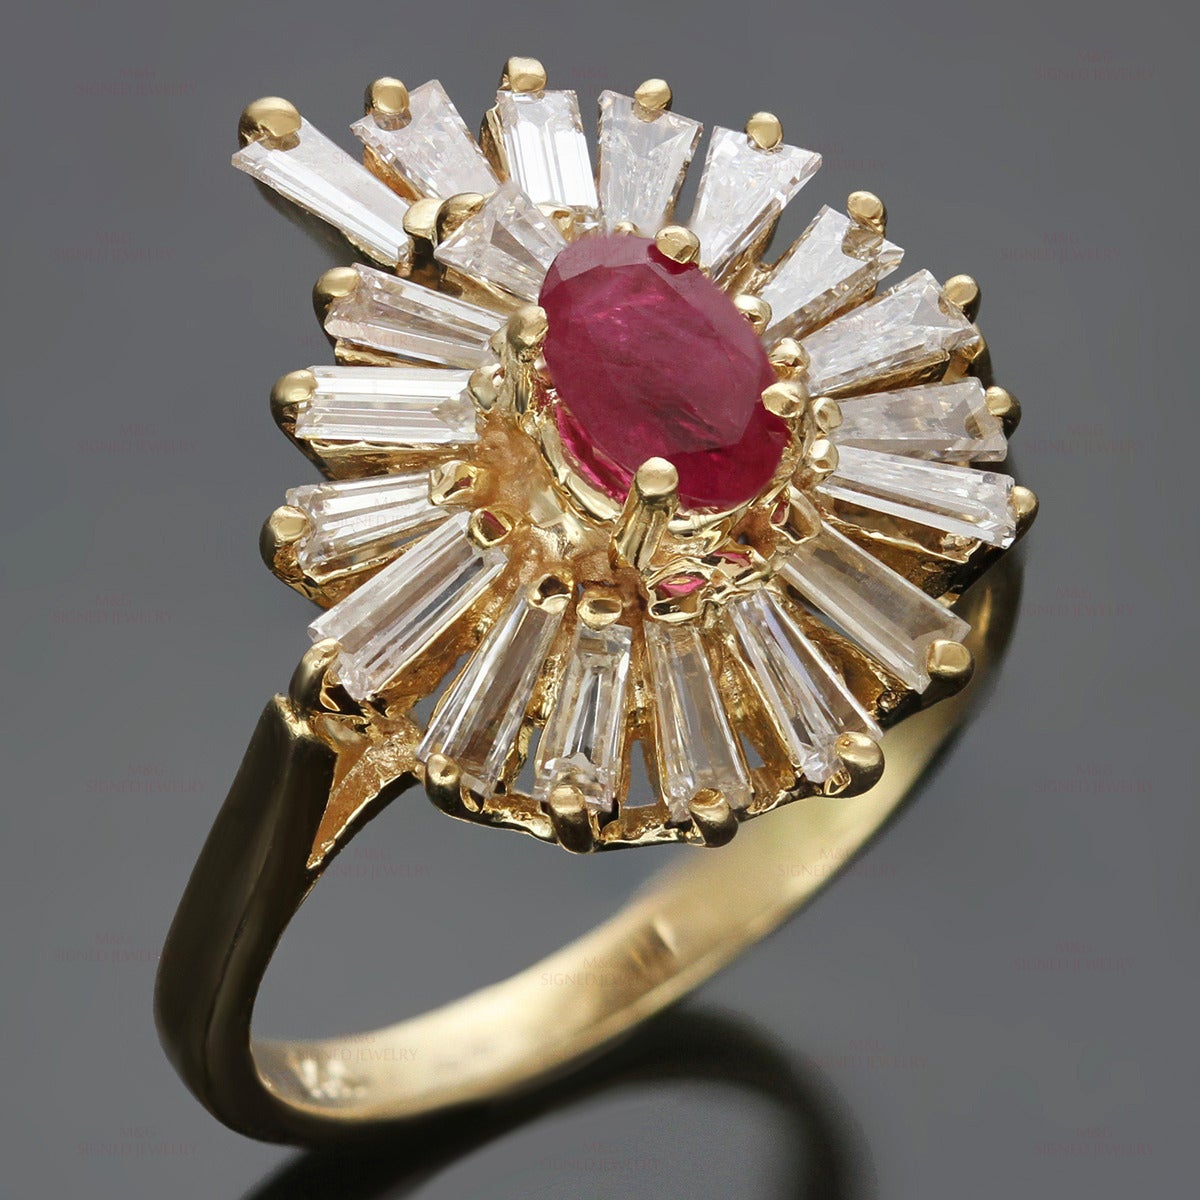 This classic vintage cocktail ring is made in 14k yellow gold and features a swirling design set with baguette-cut H-I VS2-SI1 diamonds of an estimated 1.55 carats and an oval red ruby of an estimated 0.40 carats. Measurements: 0.70" (18mm)